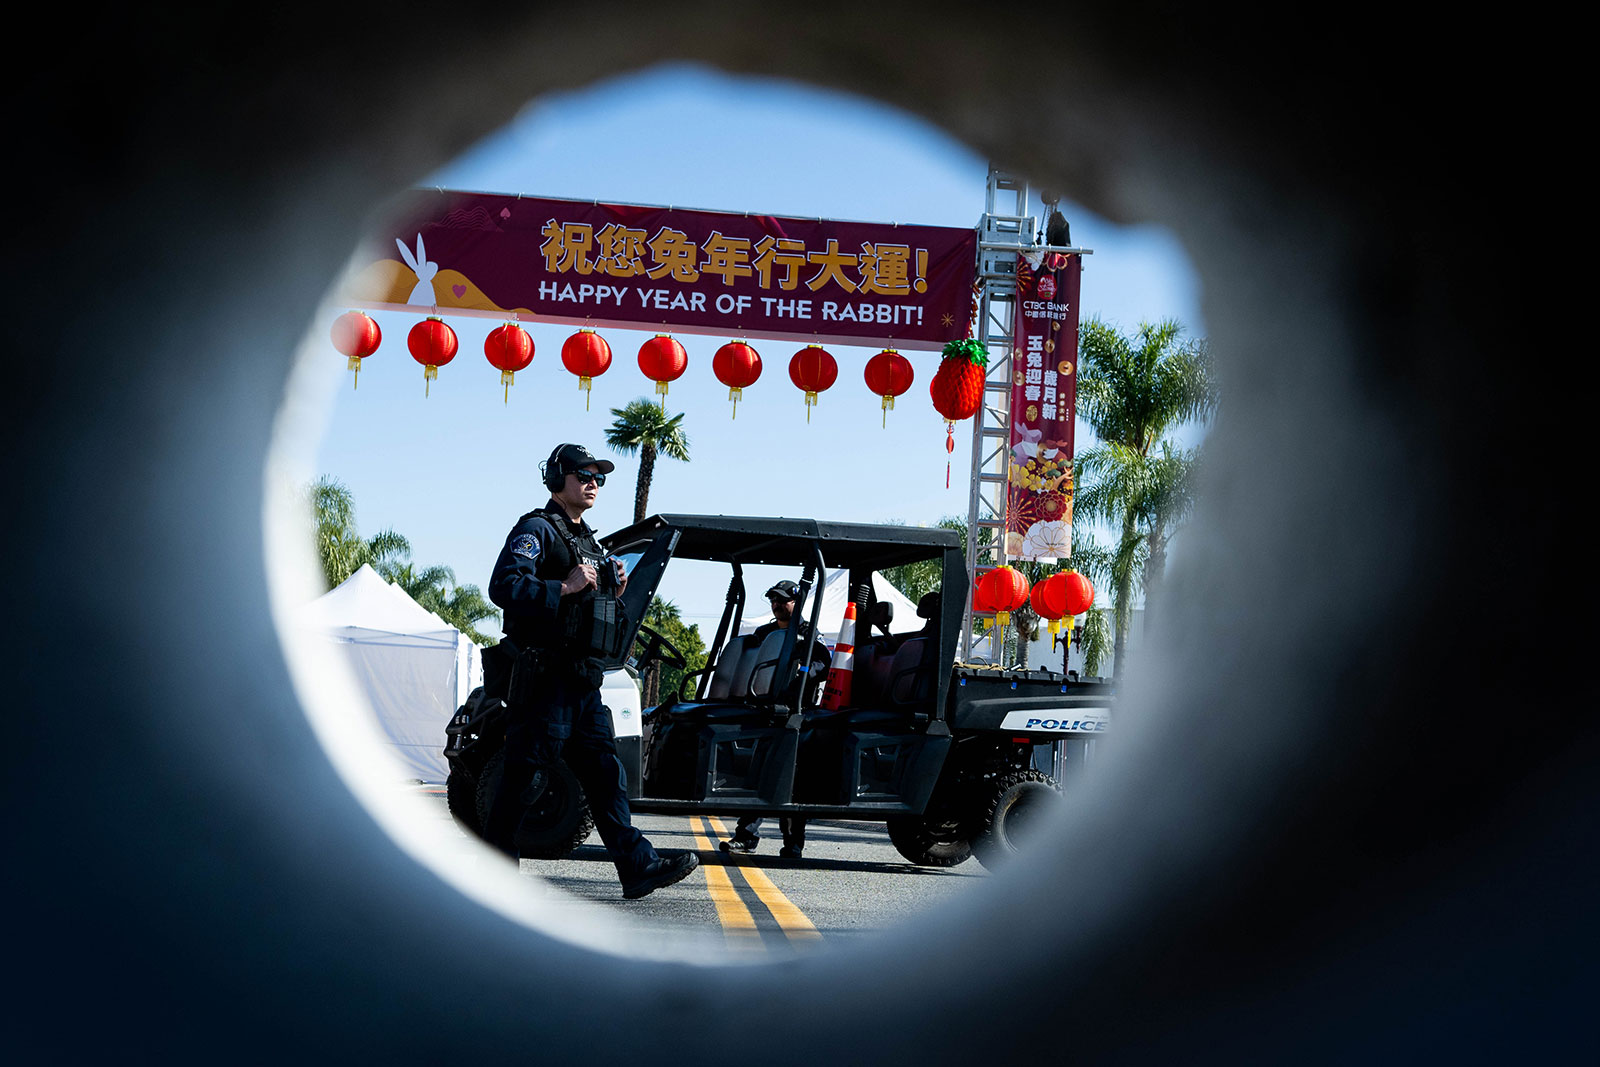 Monterey Park Police stand guard at the closed Lunar New Year festival site on Sunday, January 22 after a mass shooting at Star Ballroom Dance Studio Saturday night. 